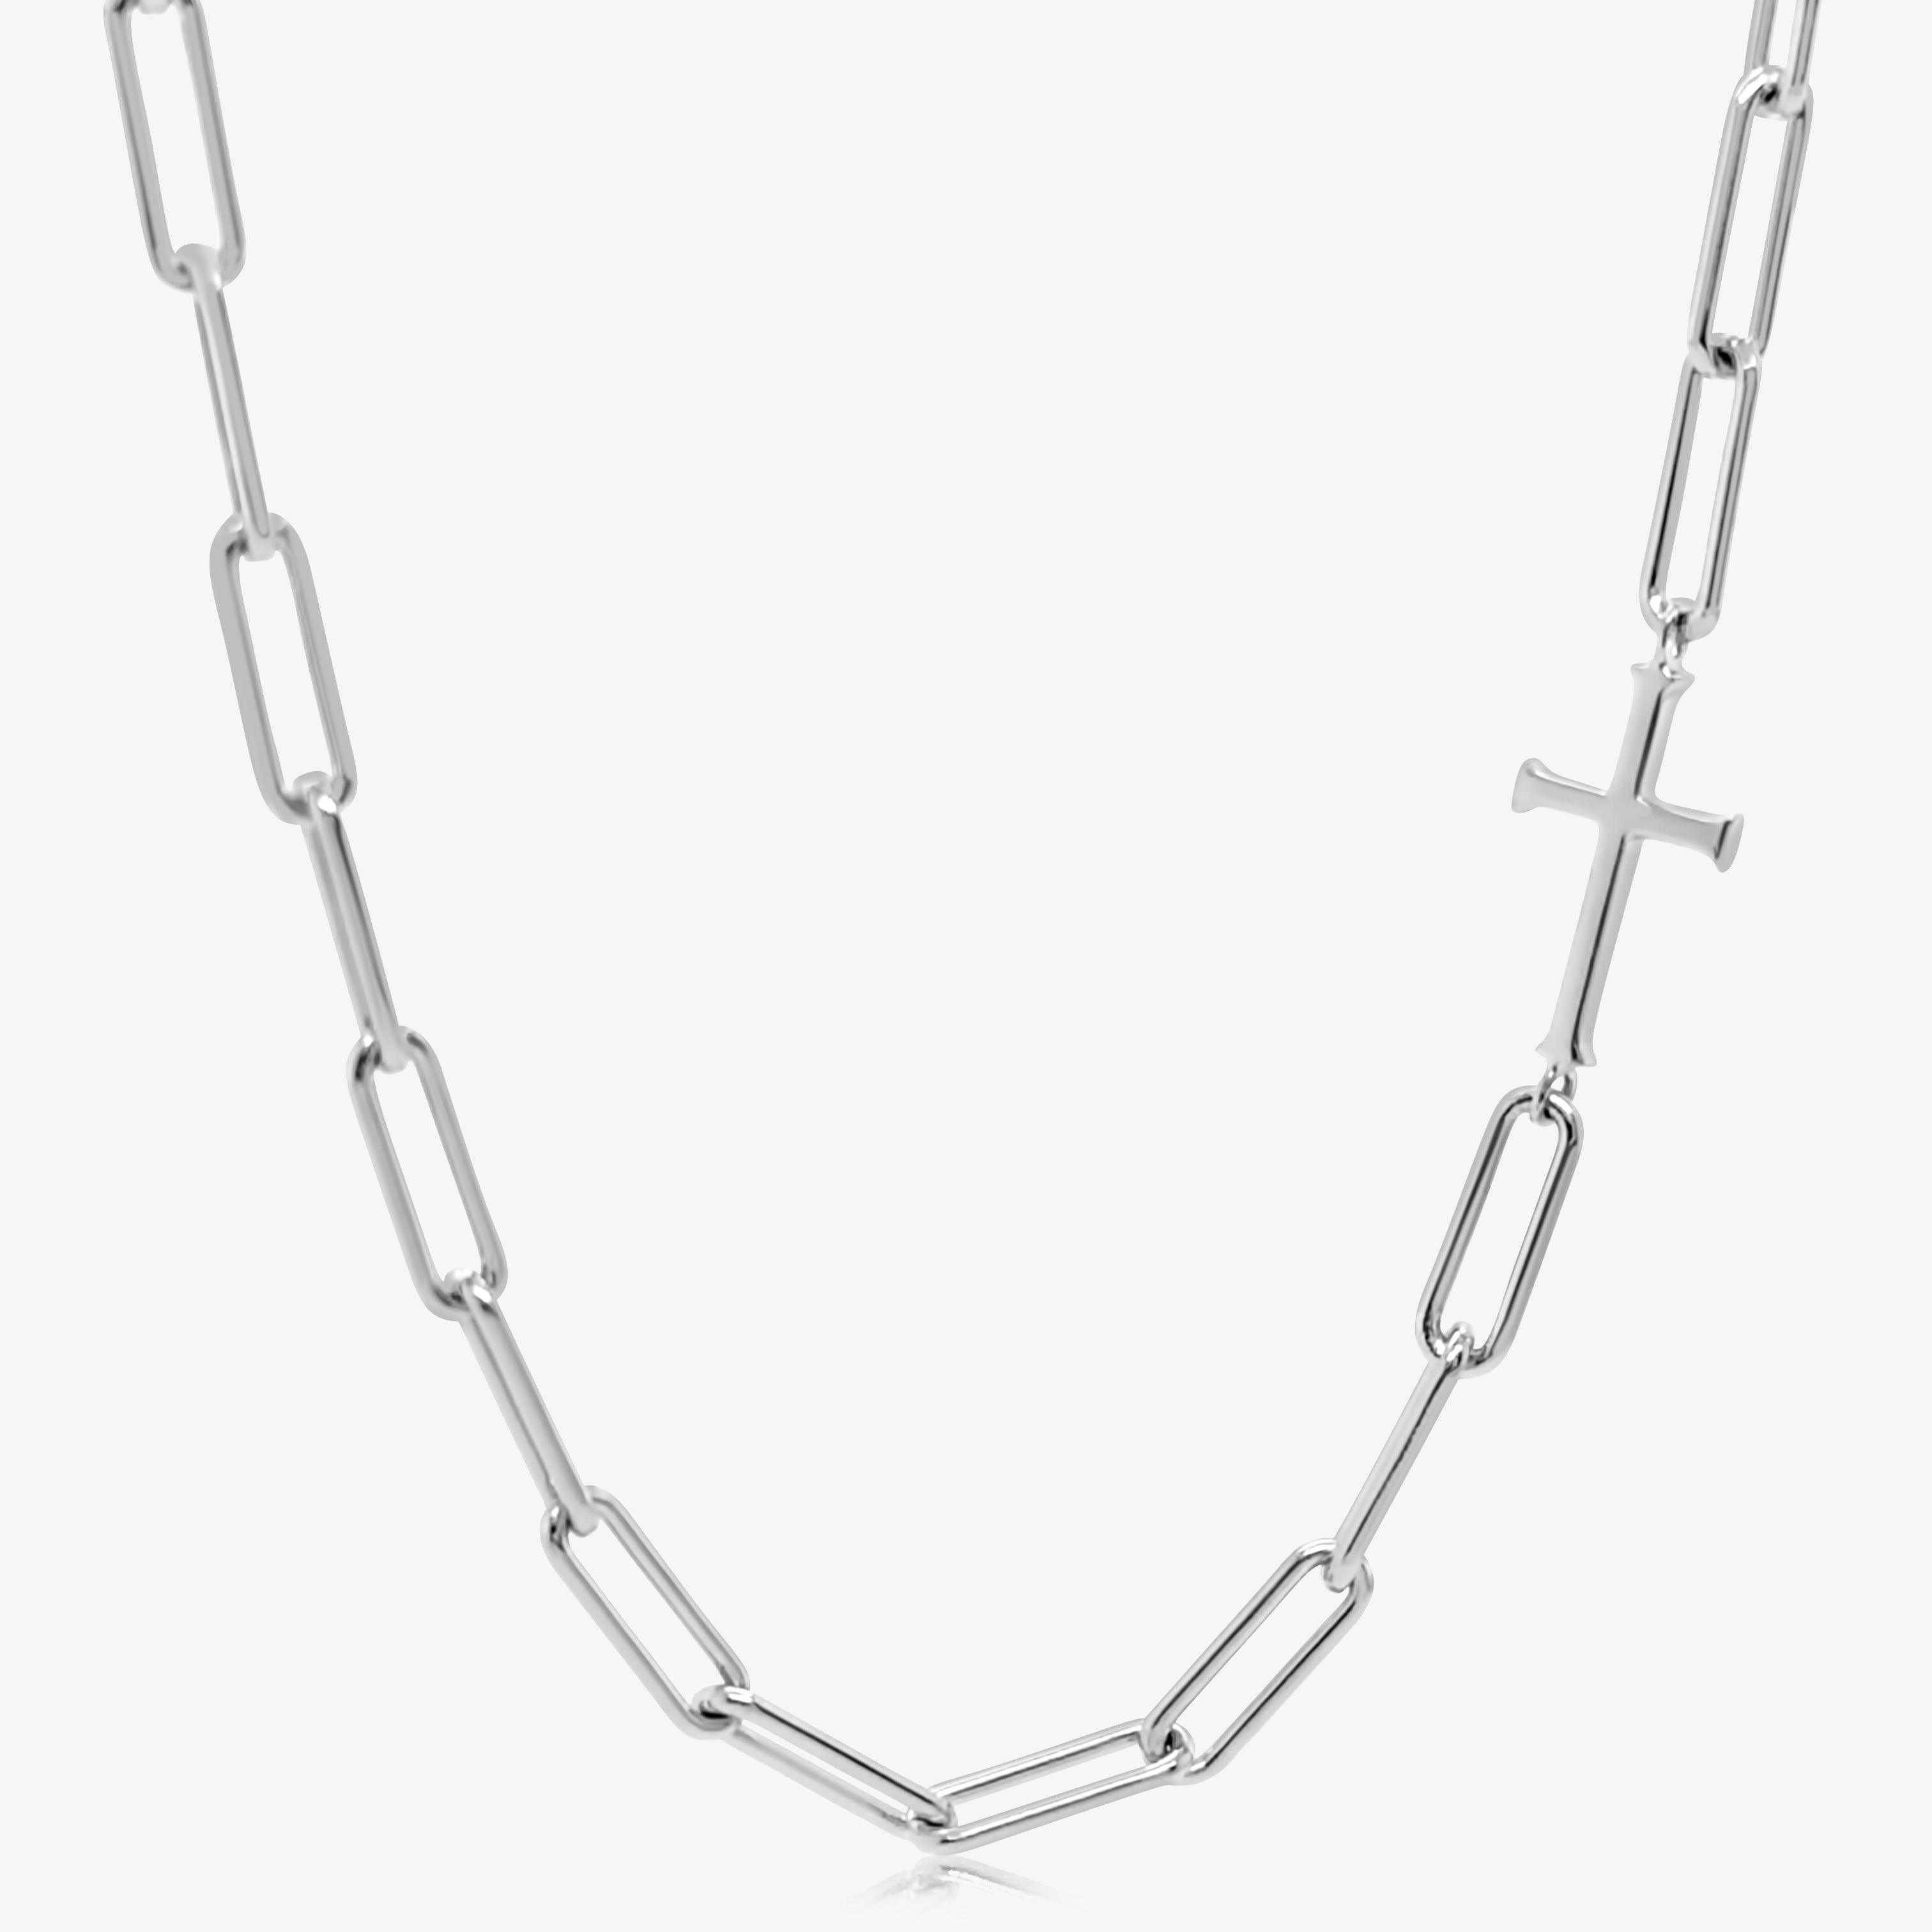 Rizen Jewelry Chain Breaker necklace in sterling silver.  Elegant Cross Pendant breaks up the paper clip link chain with classic lobster clasp  closure. 